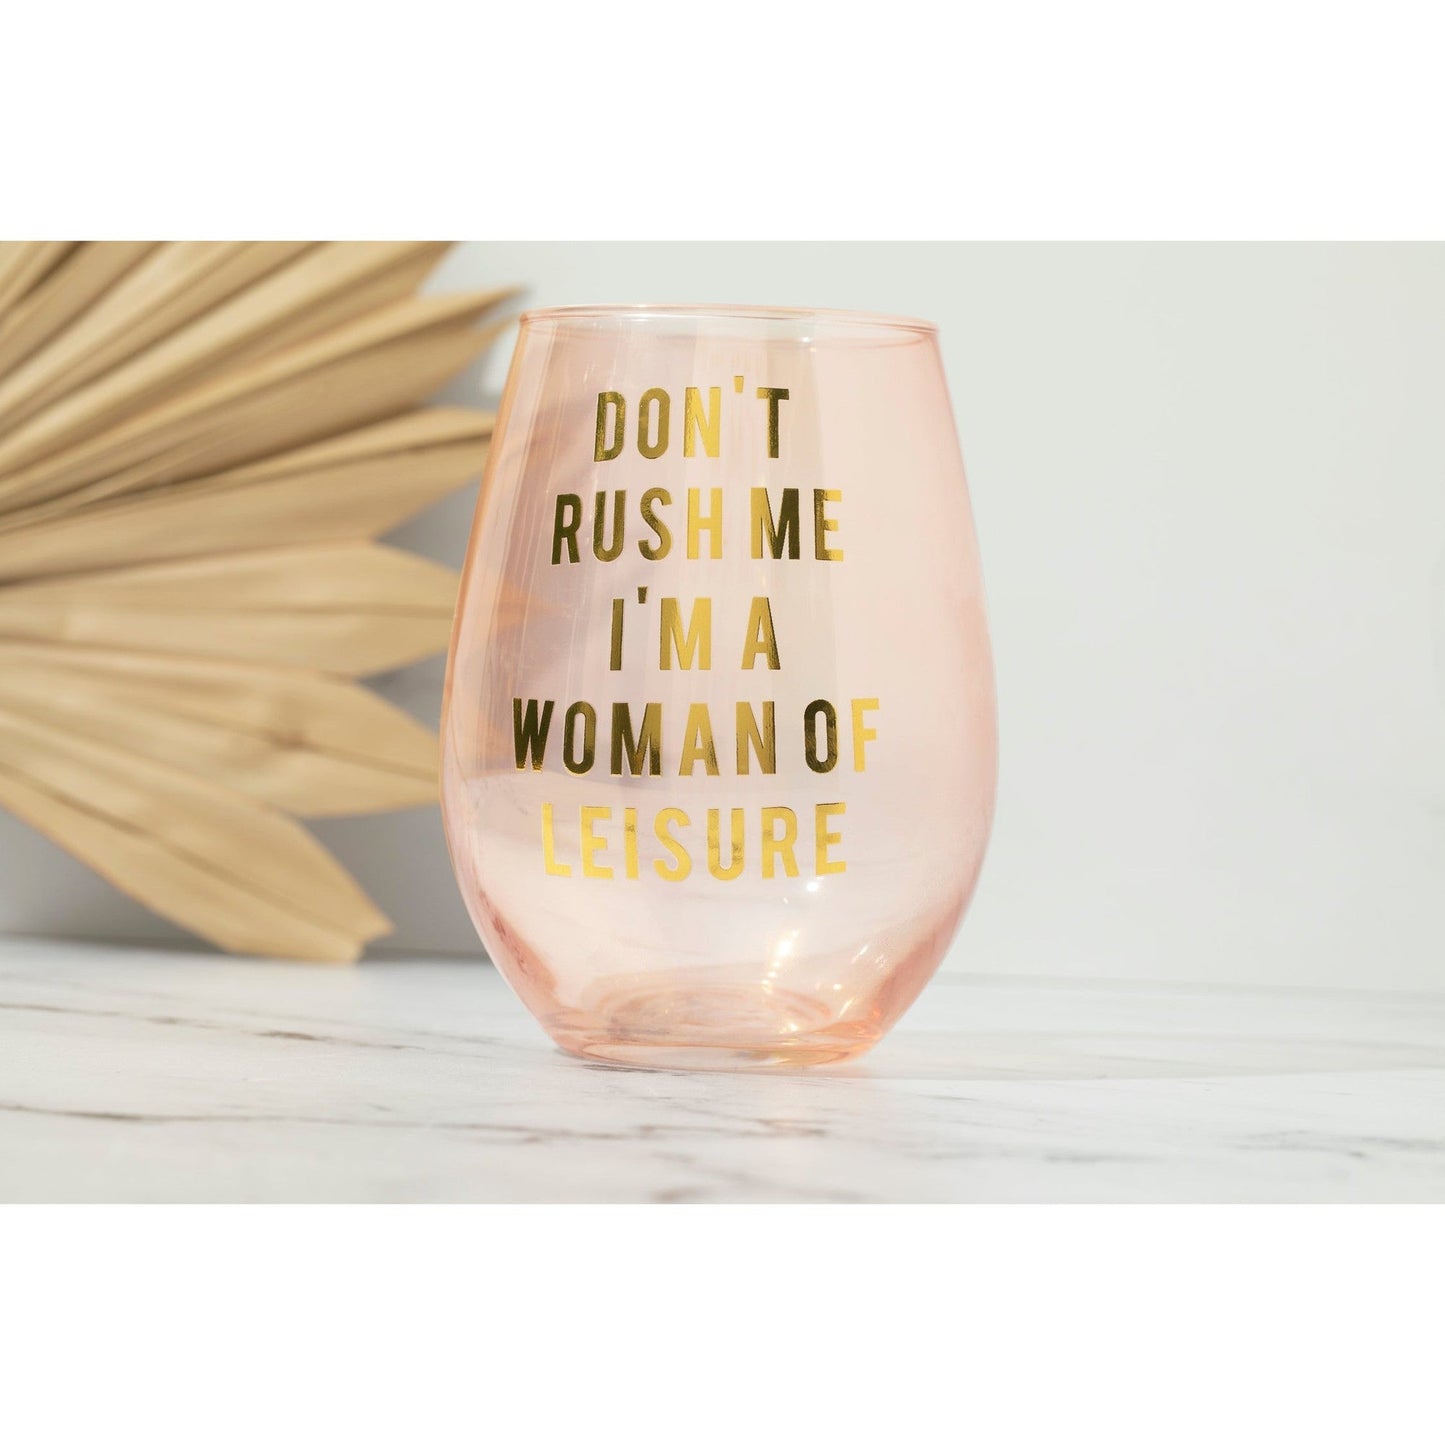 Don't Rush Me, I'm a Woman Of Leisure Stemless Wine Glass in Rose and Gold